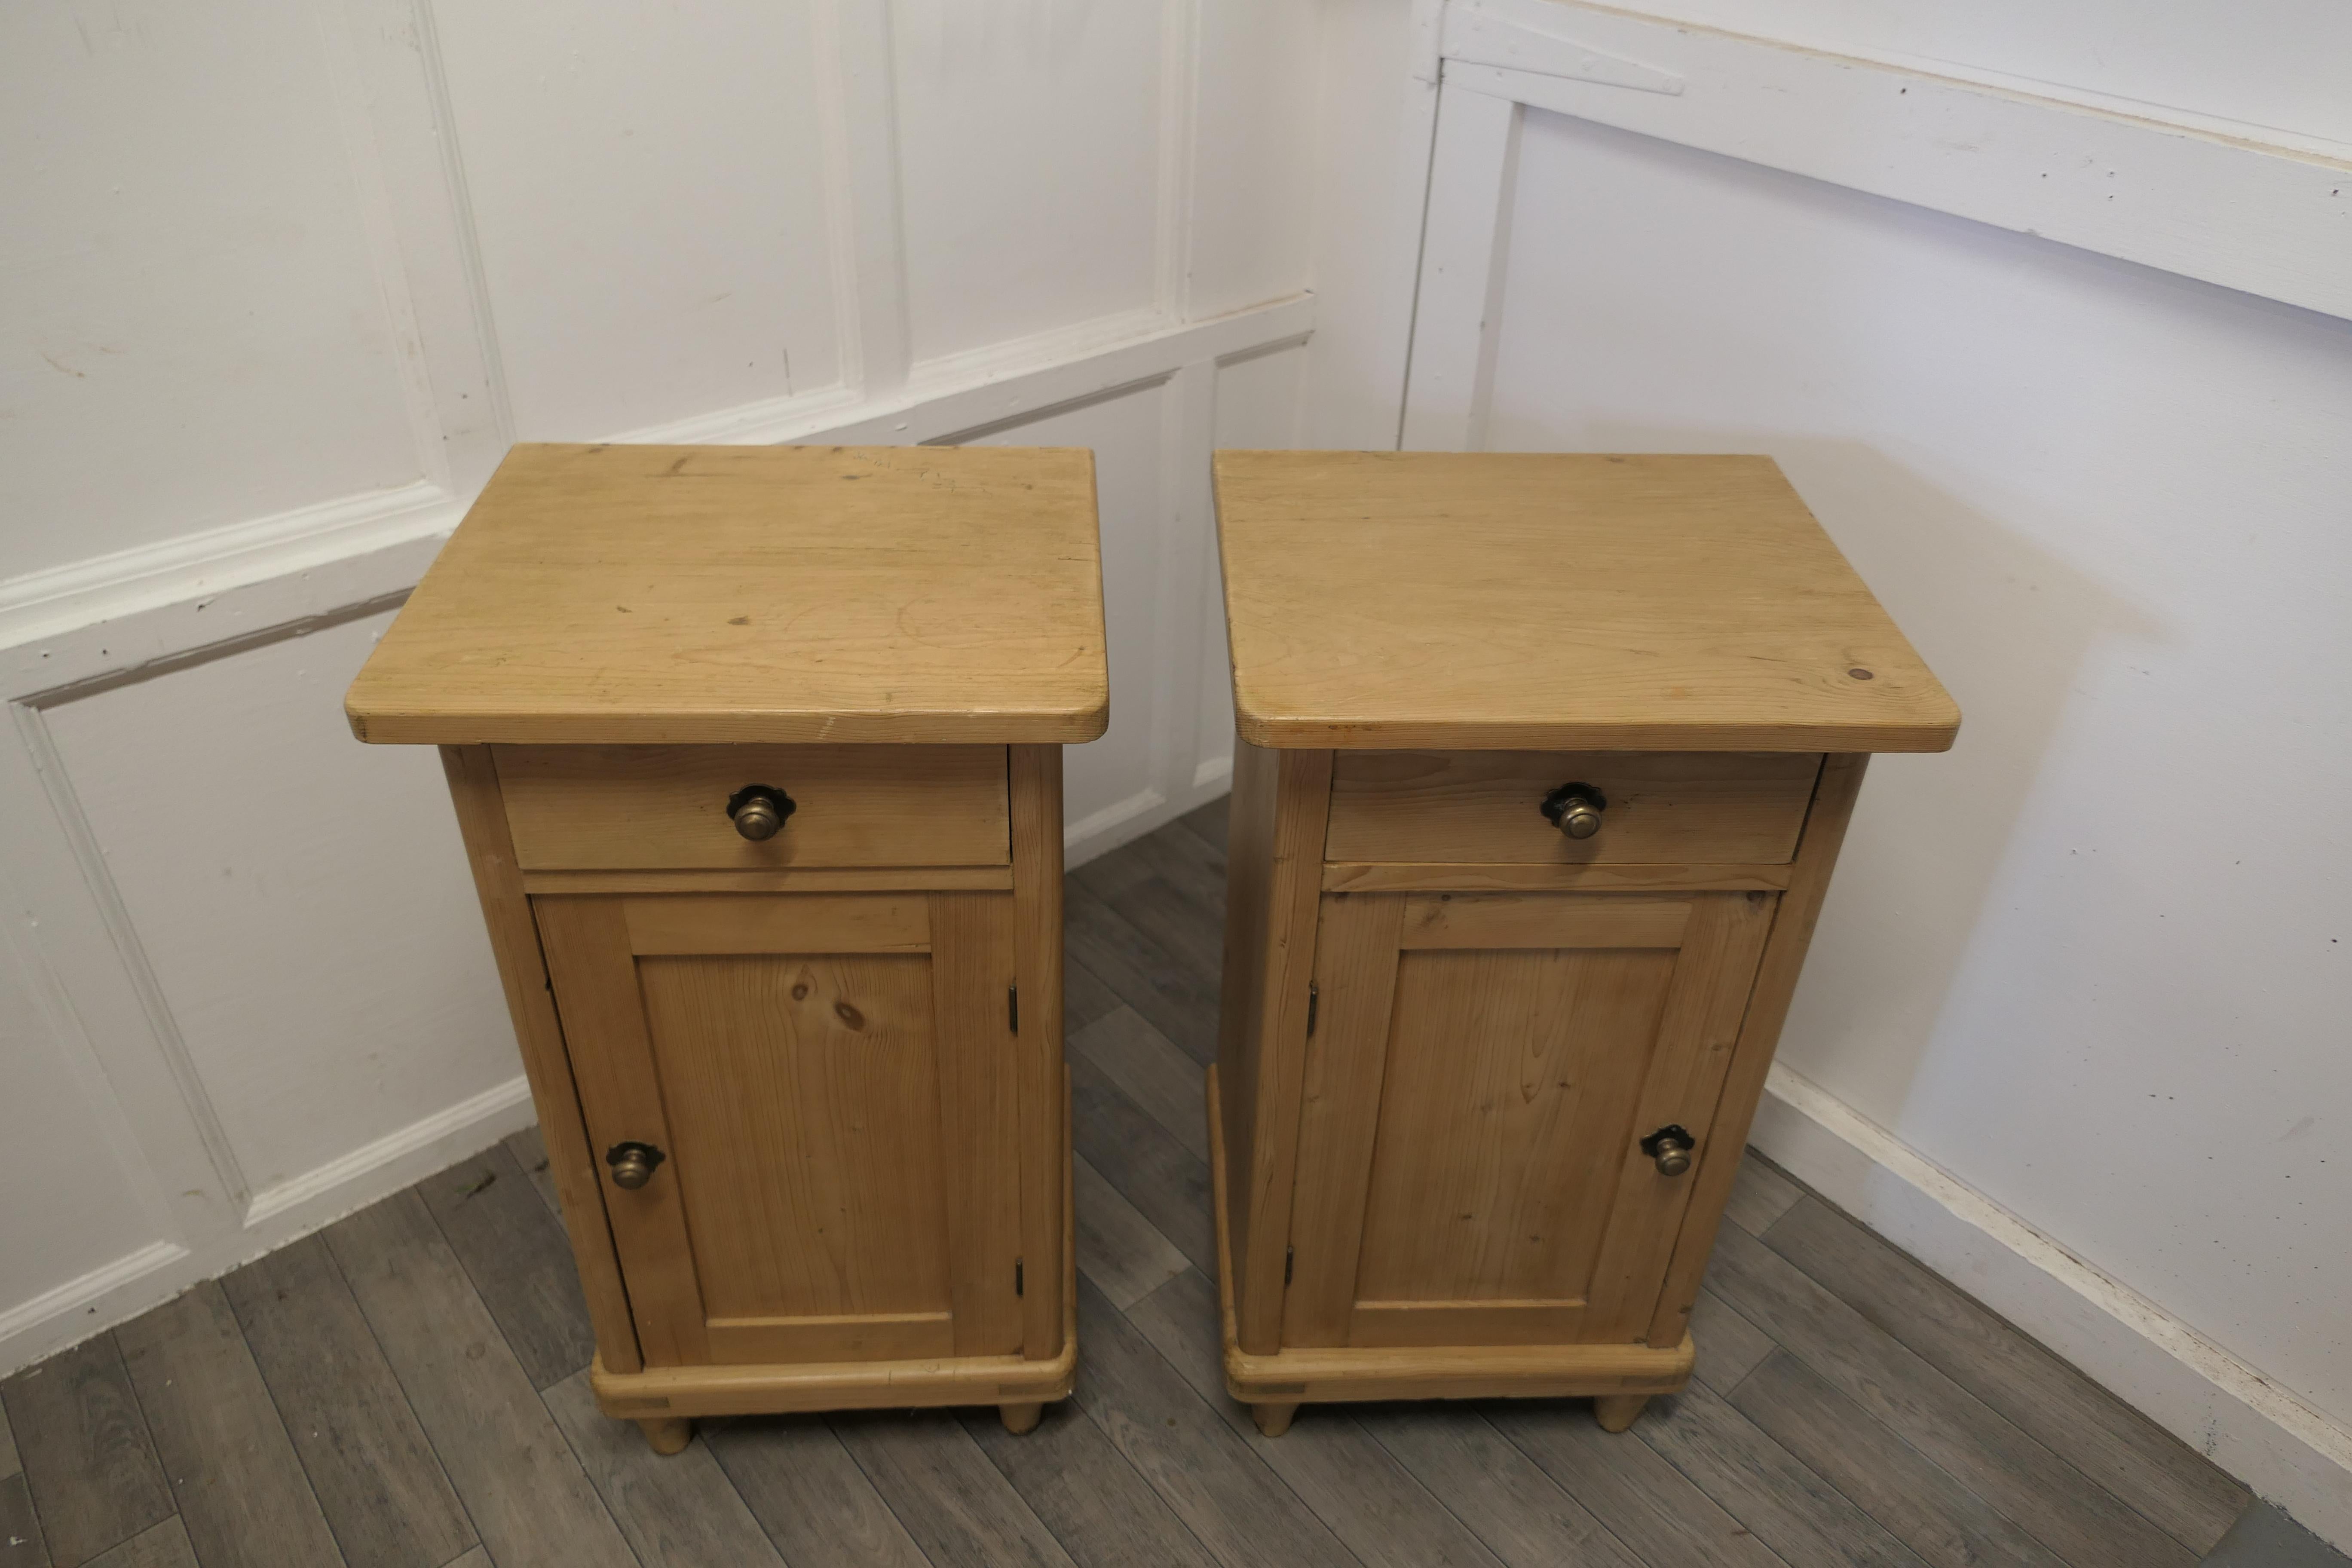 A pair of elegant pine bedside cupboards with drawers

A pair of Good Quality Pine Bedside Cabinets, each of the cupboards has a drawer over a shelved cupboard and new brass fittings
The cabinets are sound and in good condition they are 19” wide,